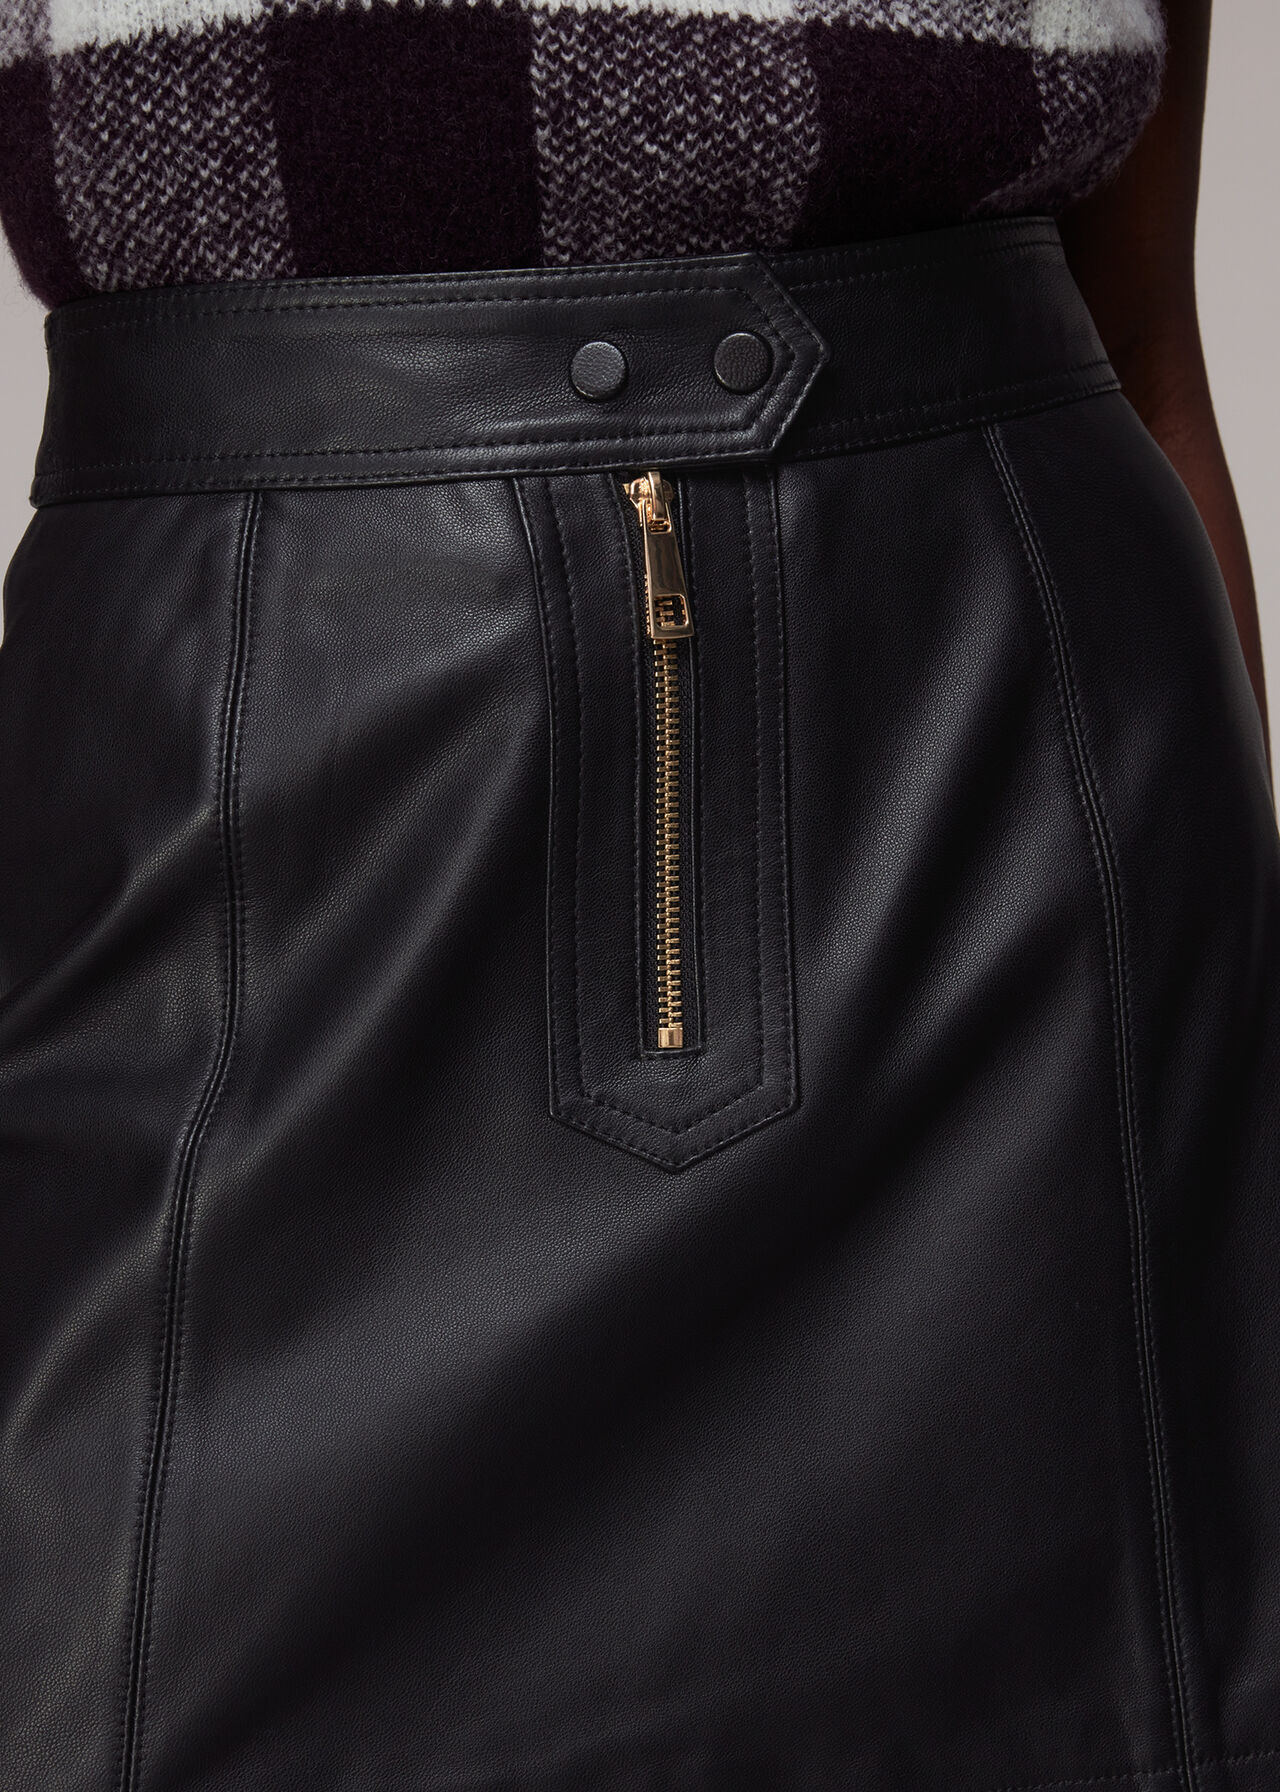 Zip Front Detail Leather Skirt